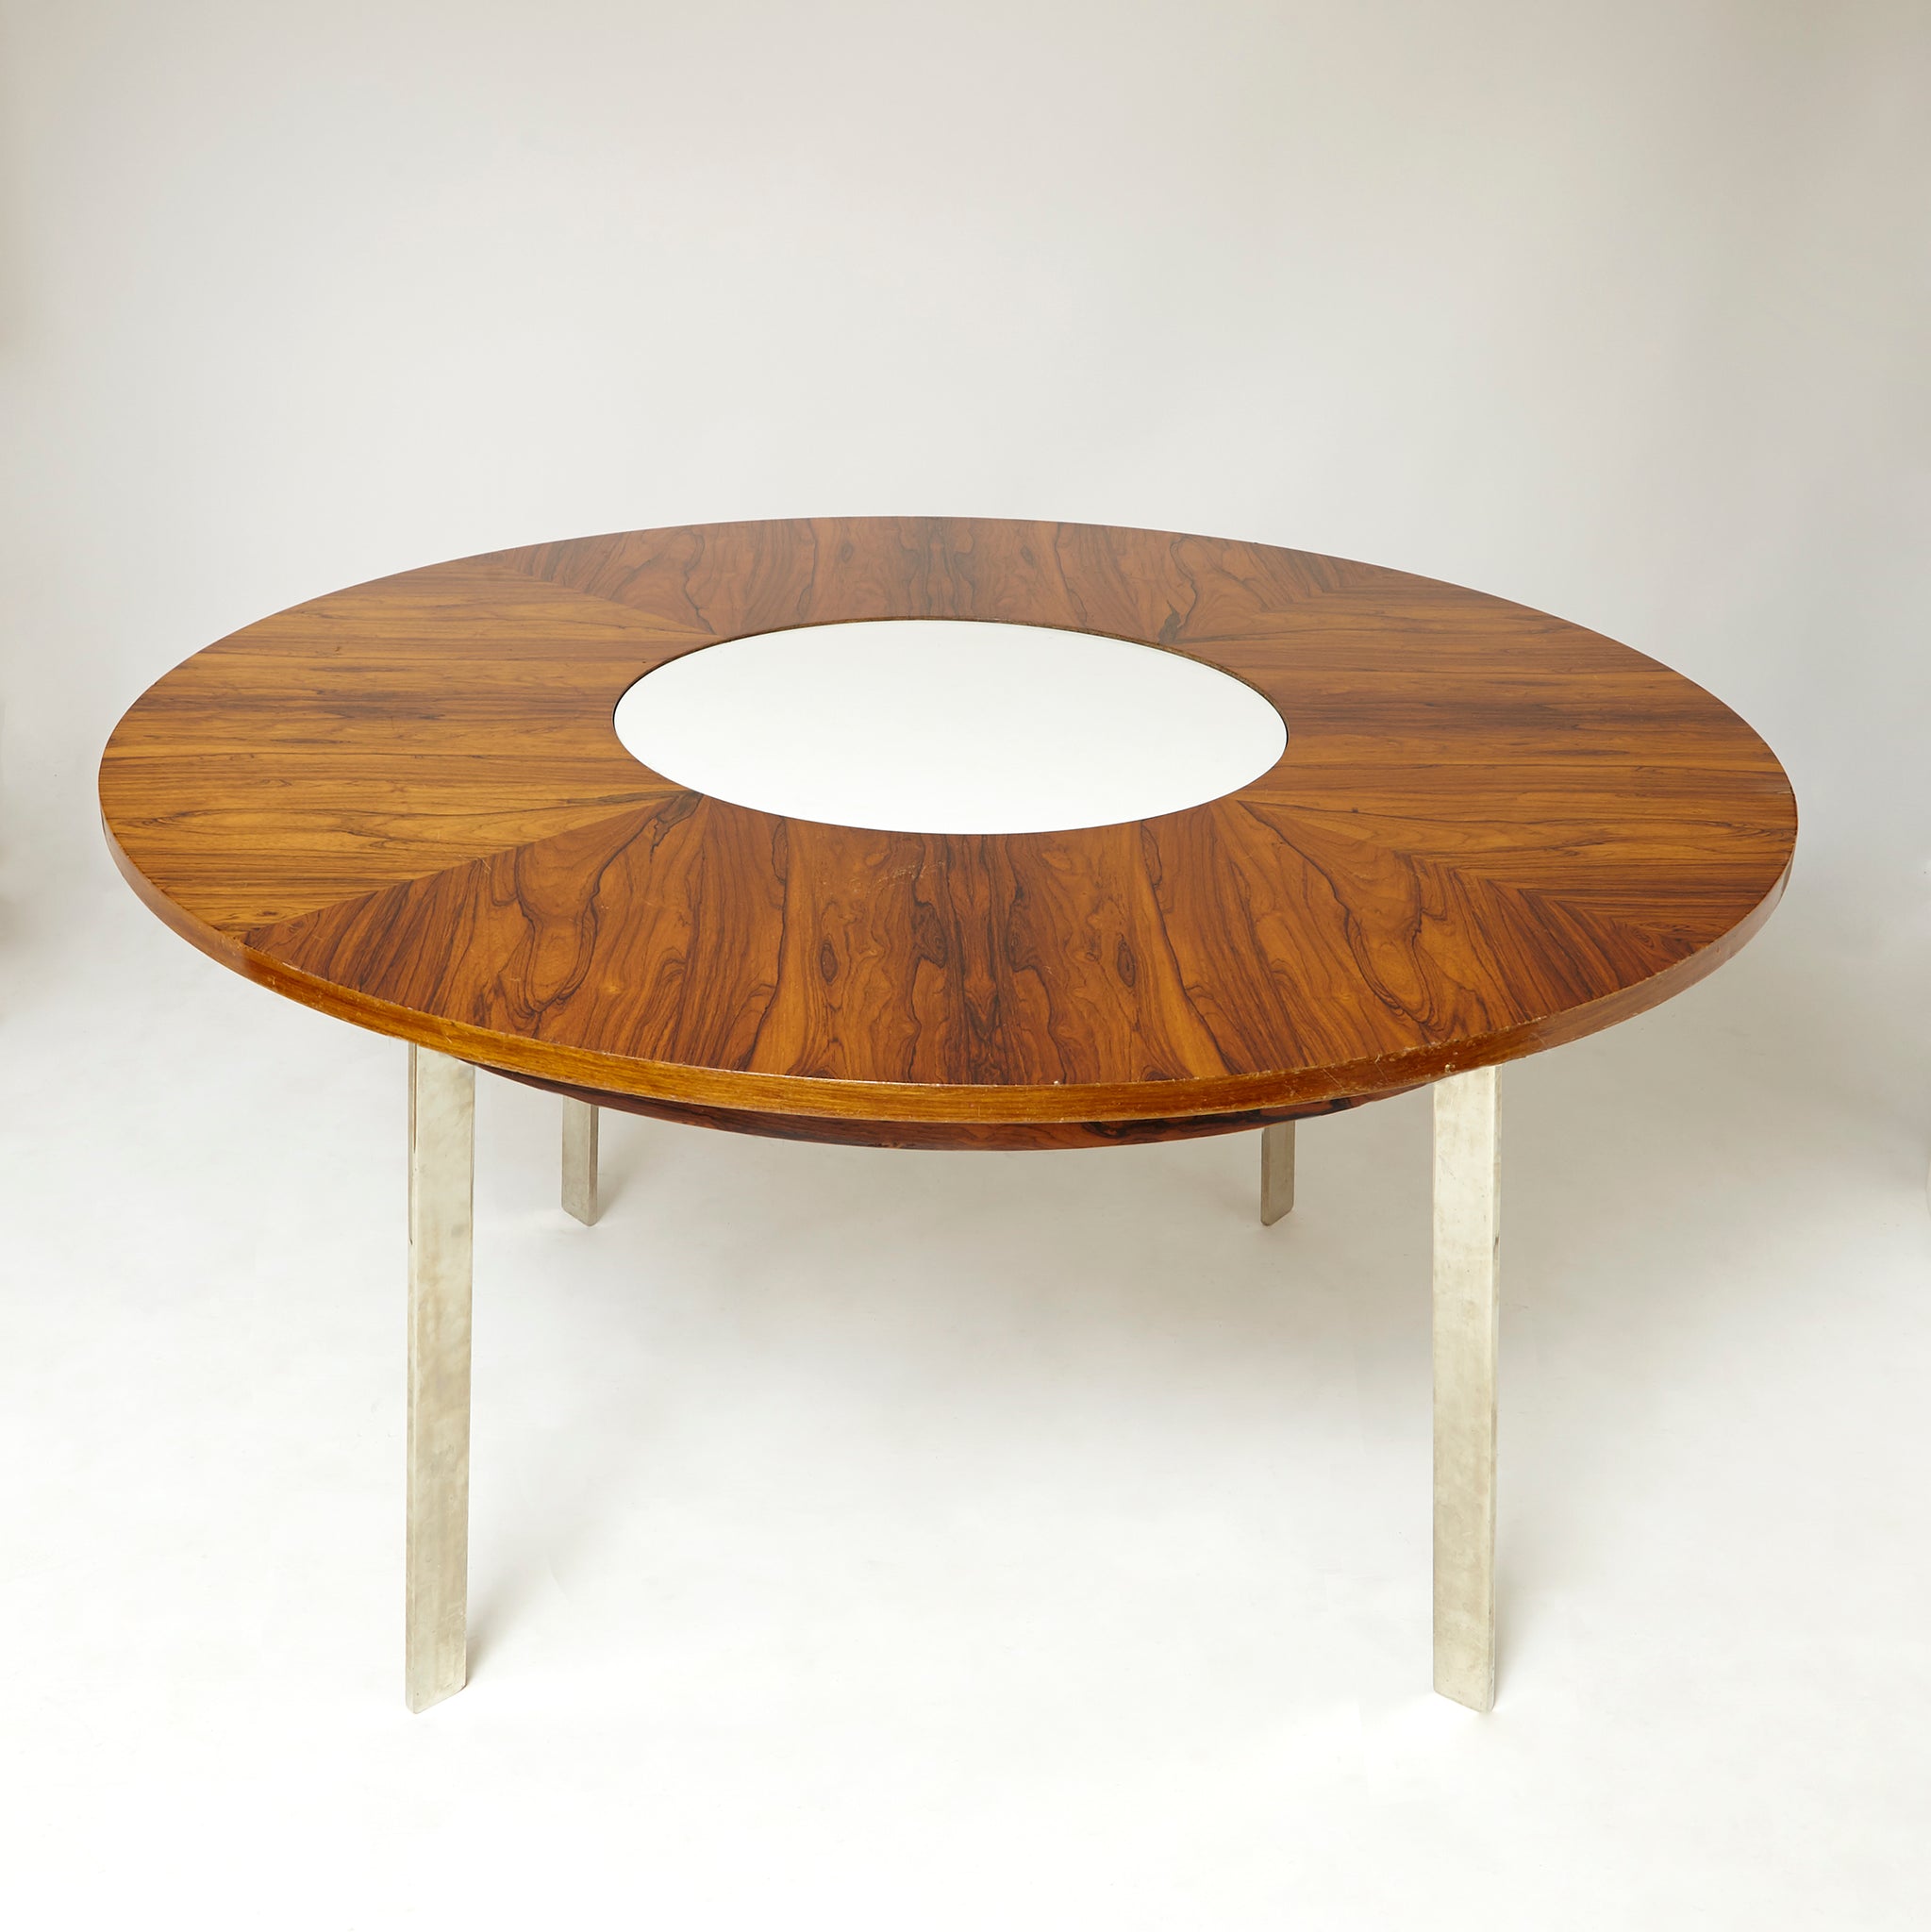 Dinning Table designed by Richard Young for Merrow associates.